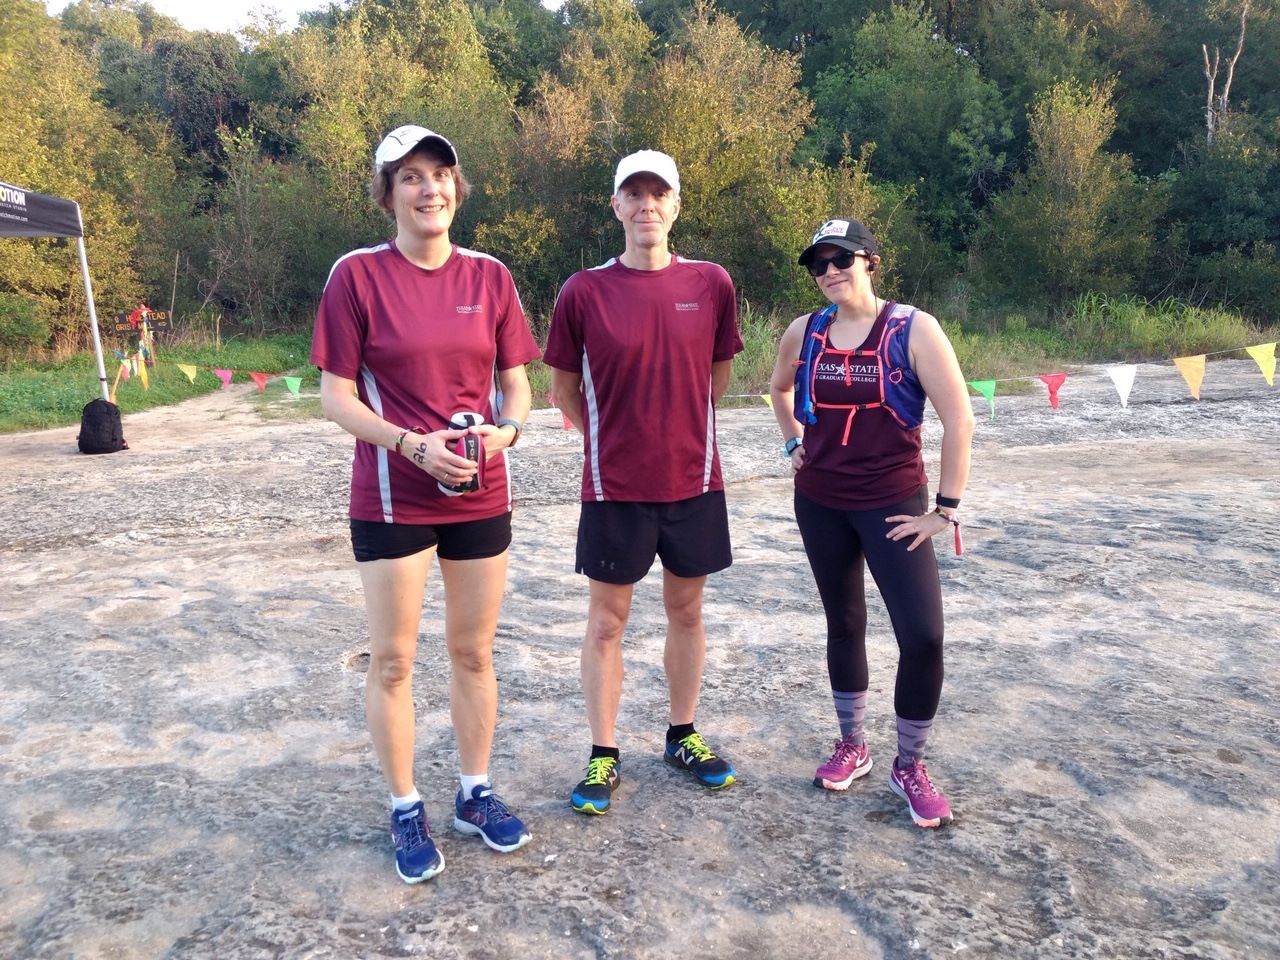 Dr. Andrea Golato, Dr. Eric Paulson, and another runner standing in front of trees, ready to run